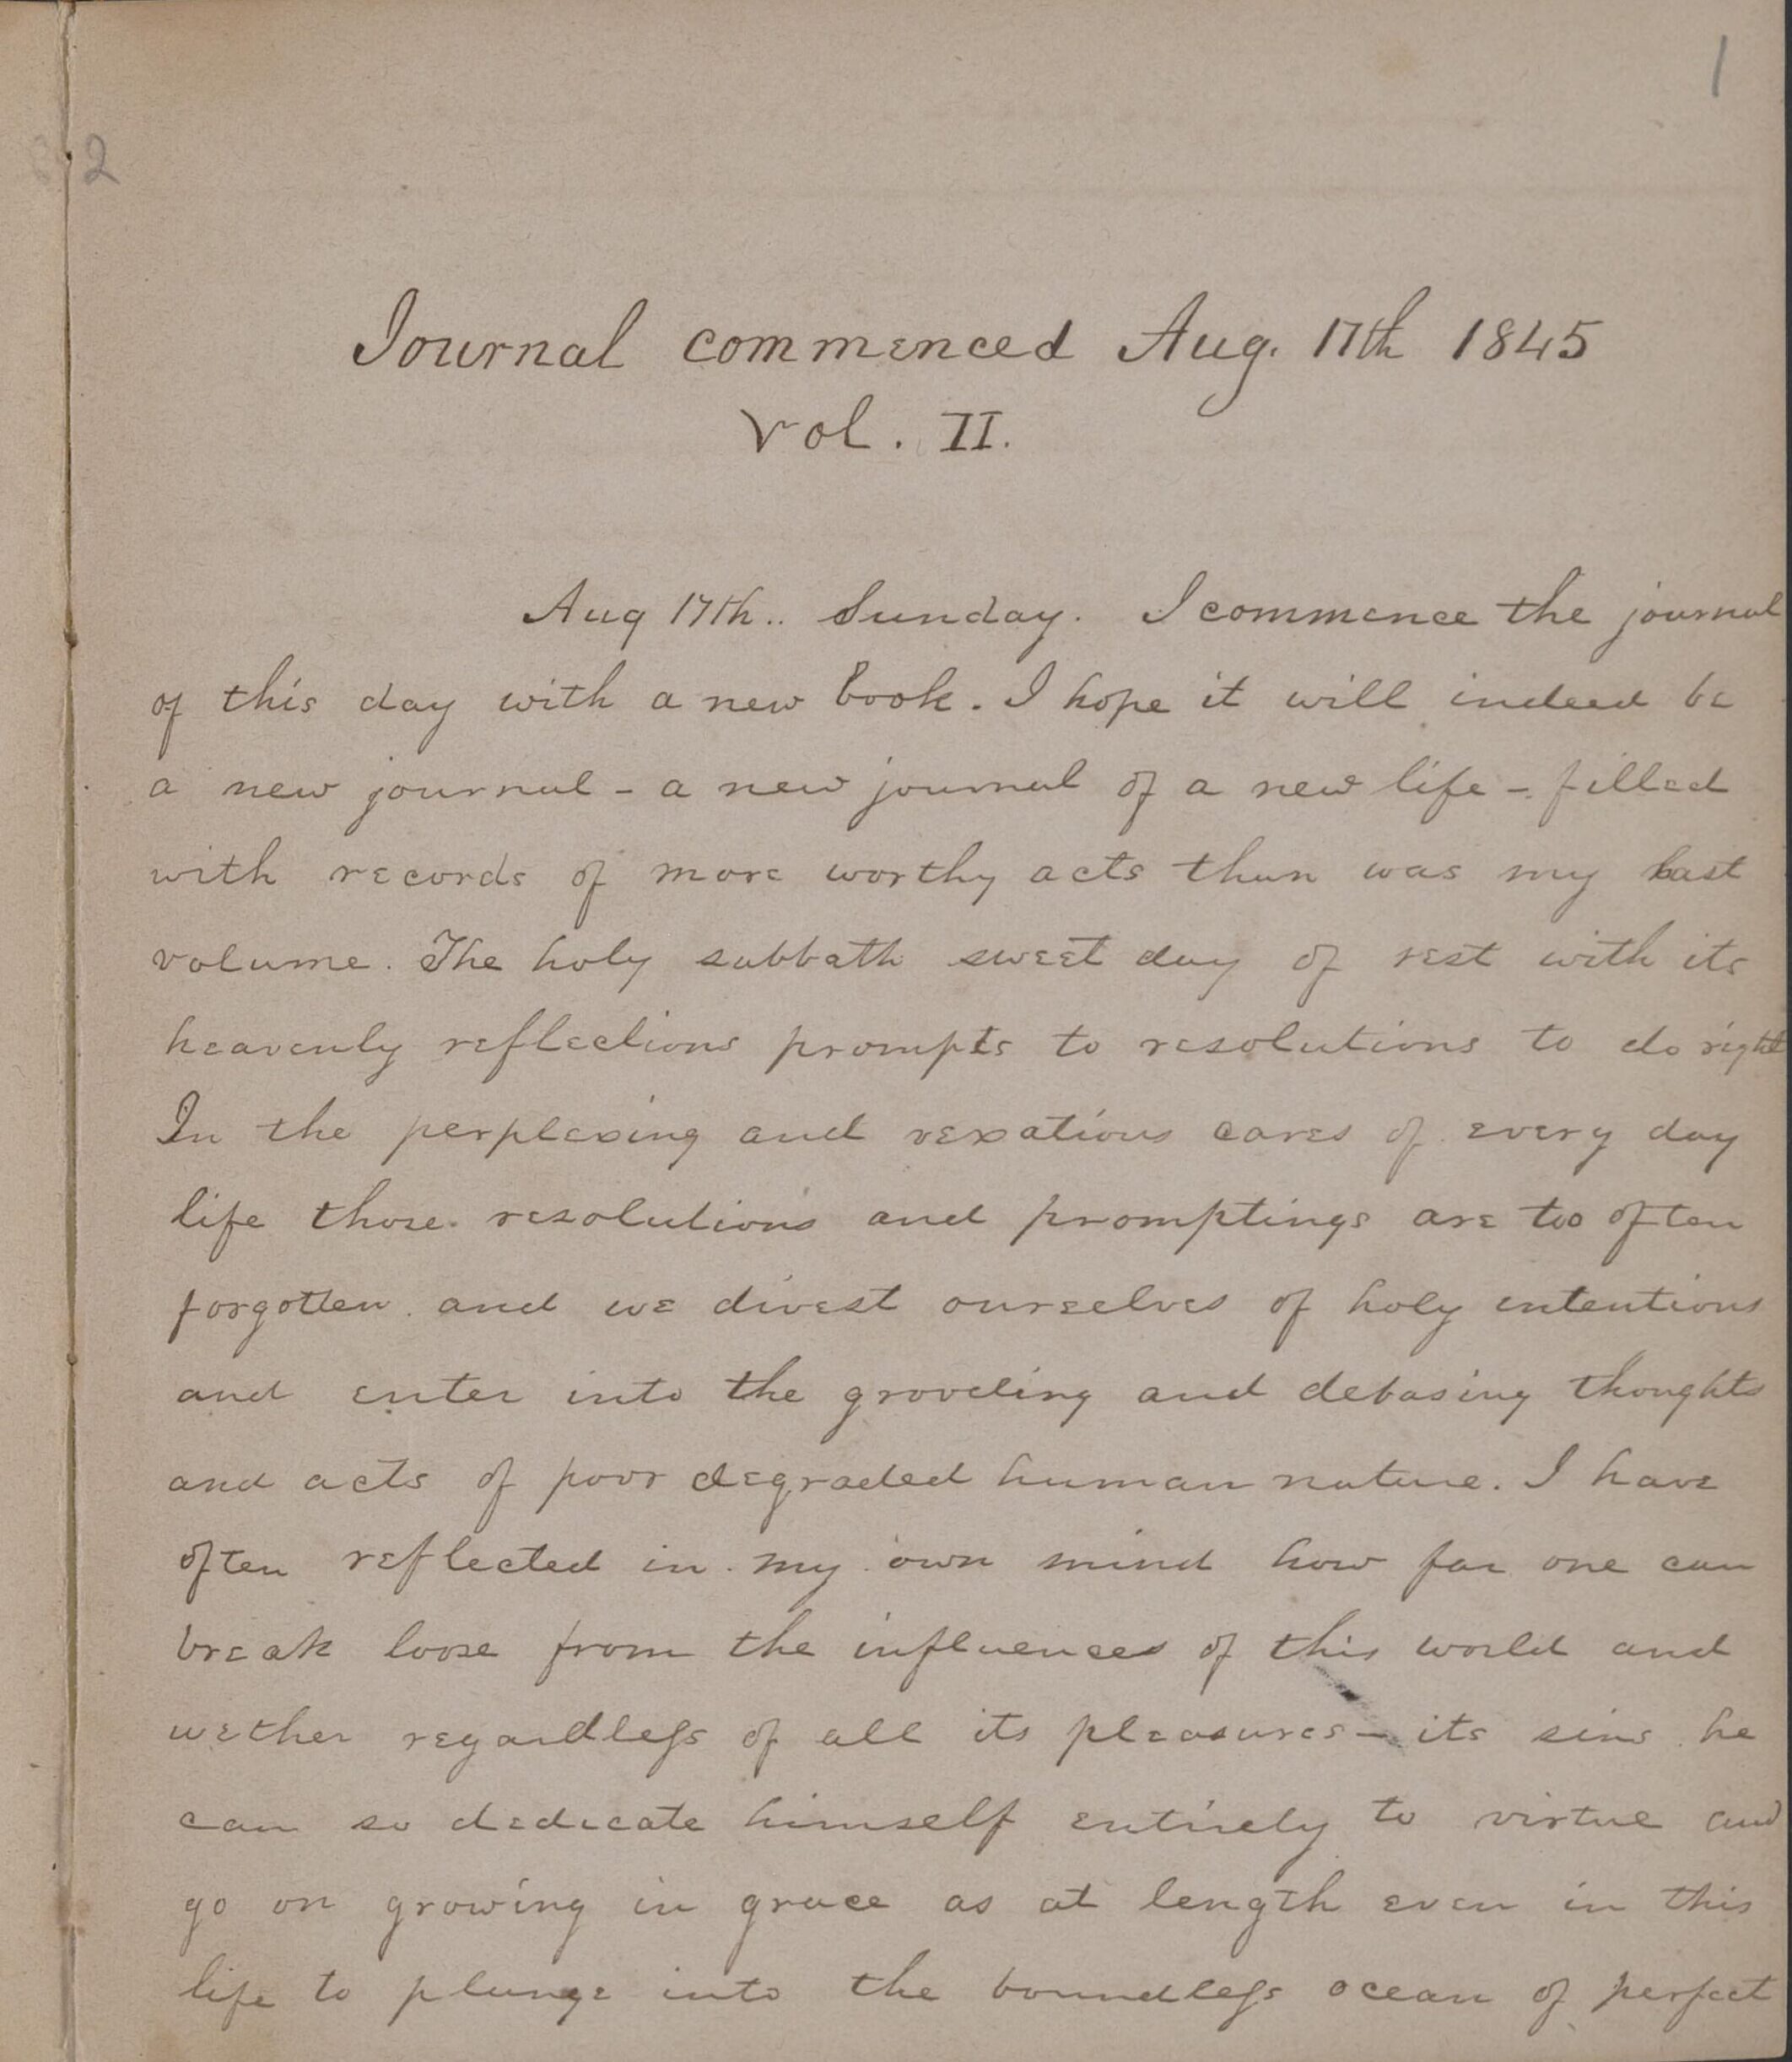 Photo of the manuscript journal entry by George W. Pray dated 17 August 1845.